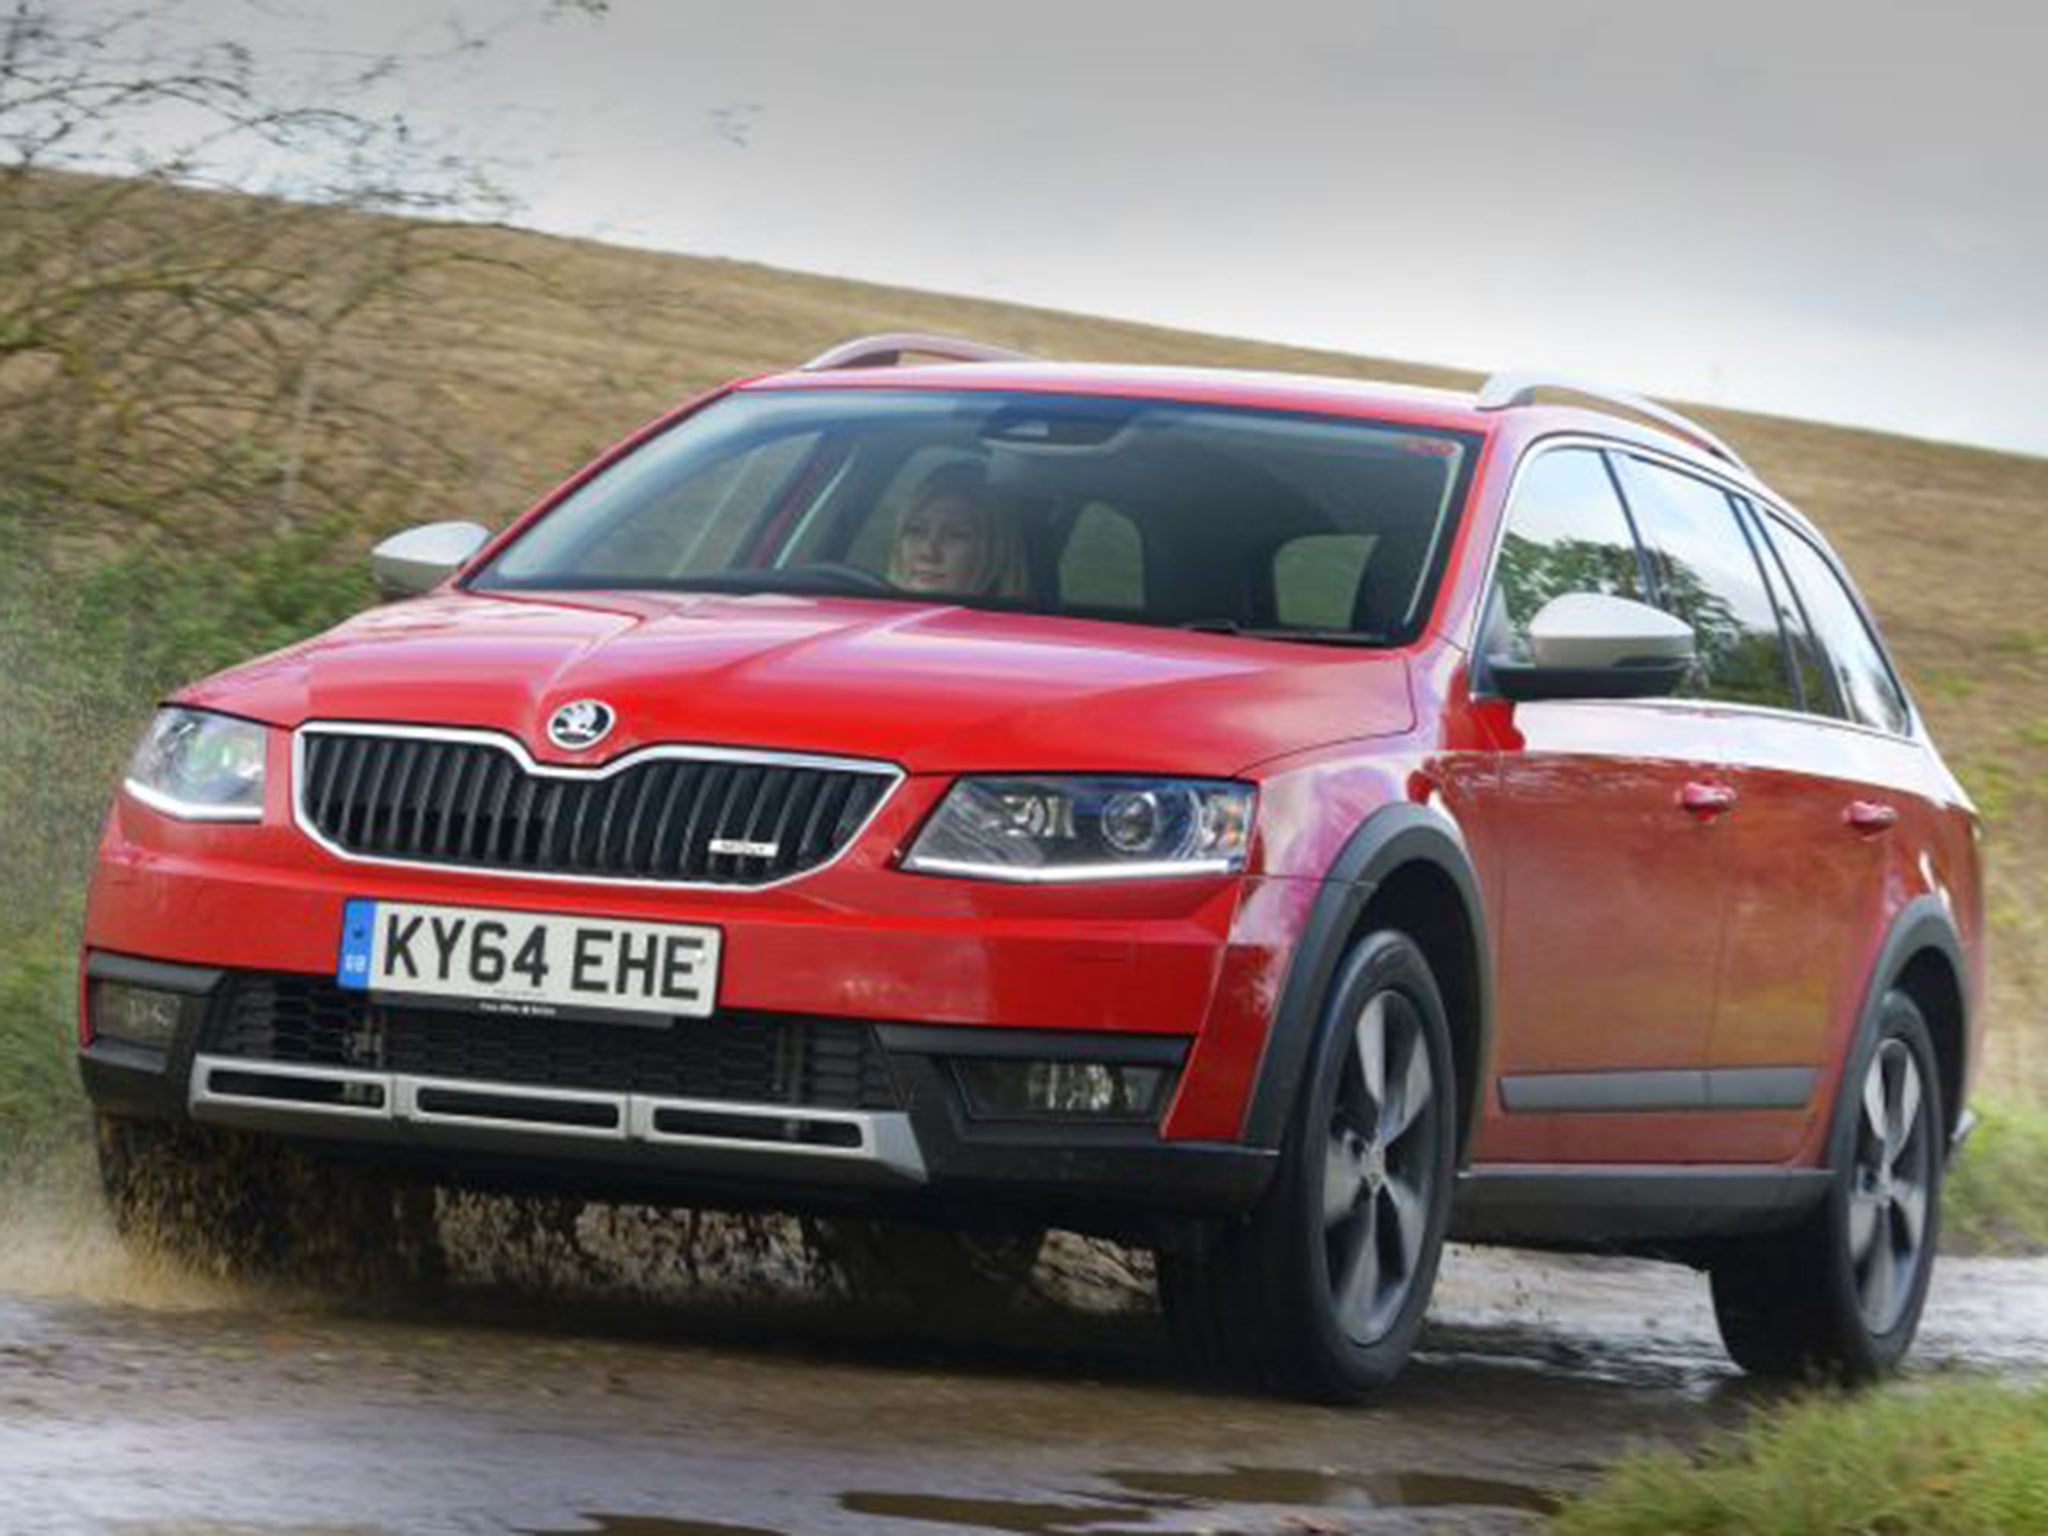 The Skoda Octavia Scout will go places most estate cars won’t